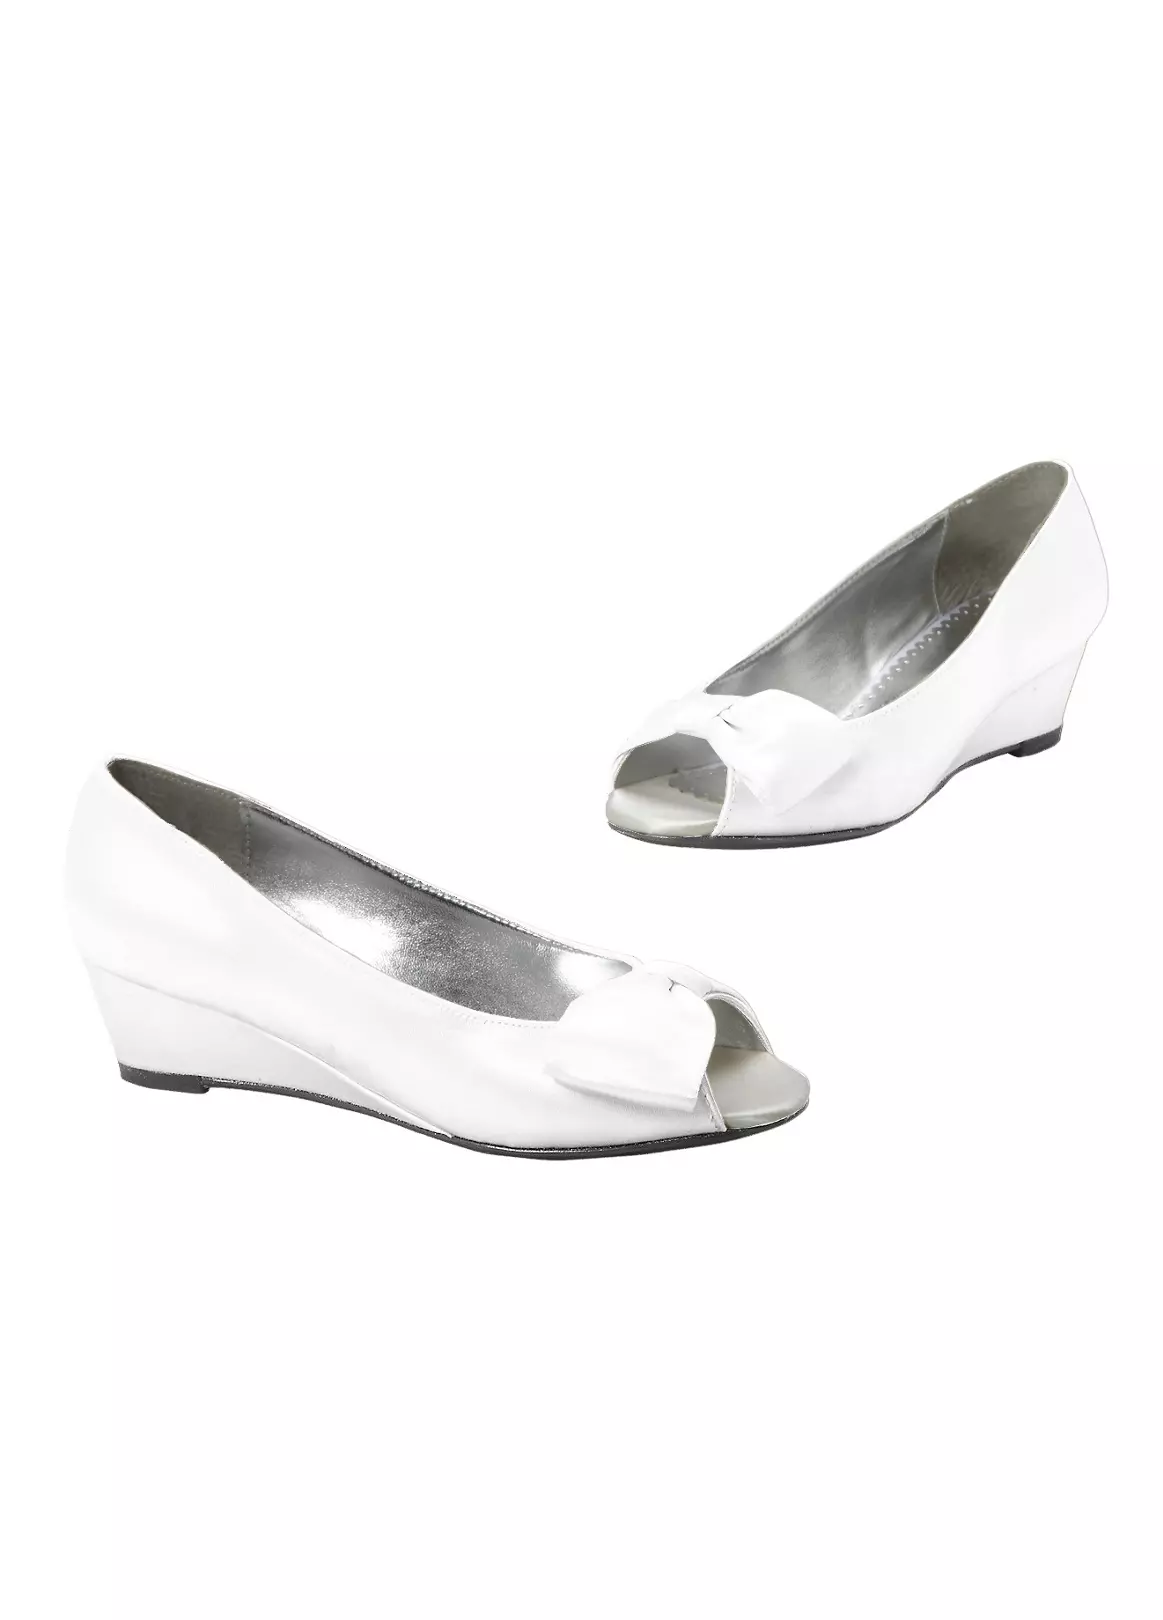 Dyeable Satin Flower Girl Peep Toe Wedge with Bow Image